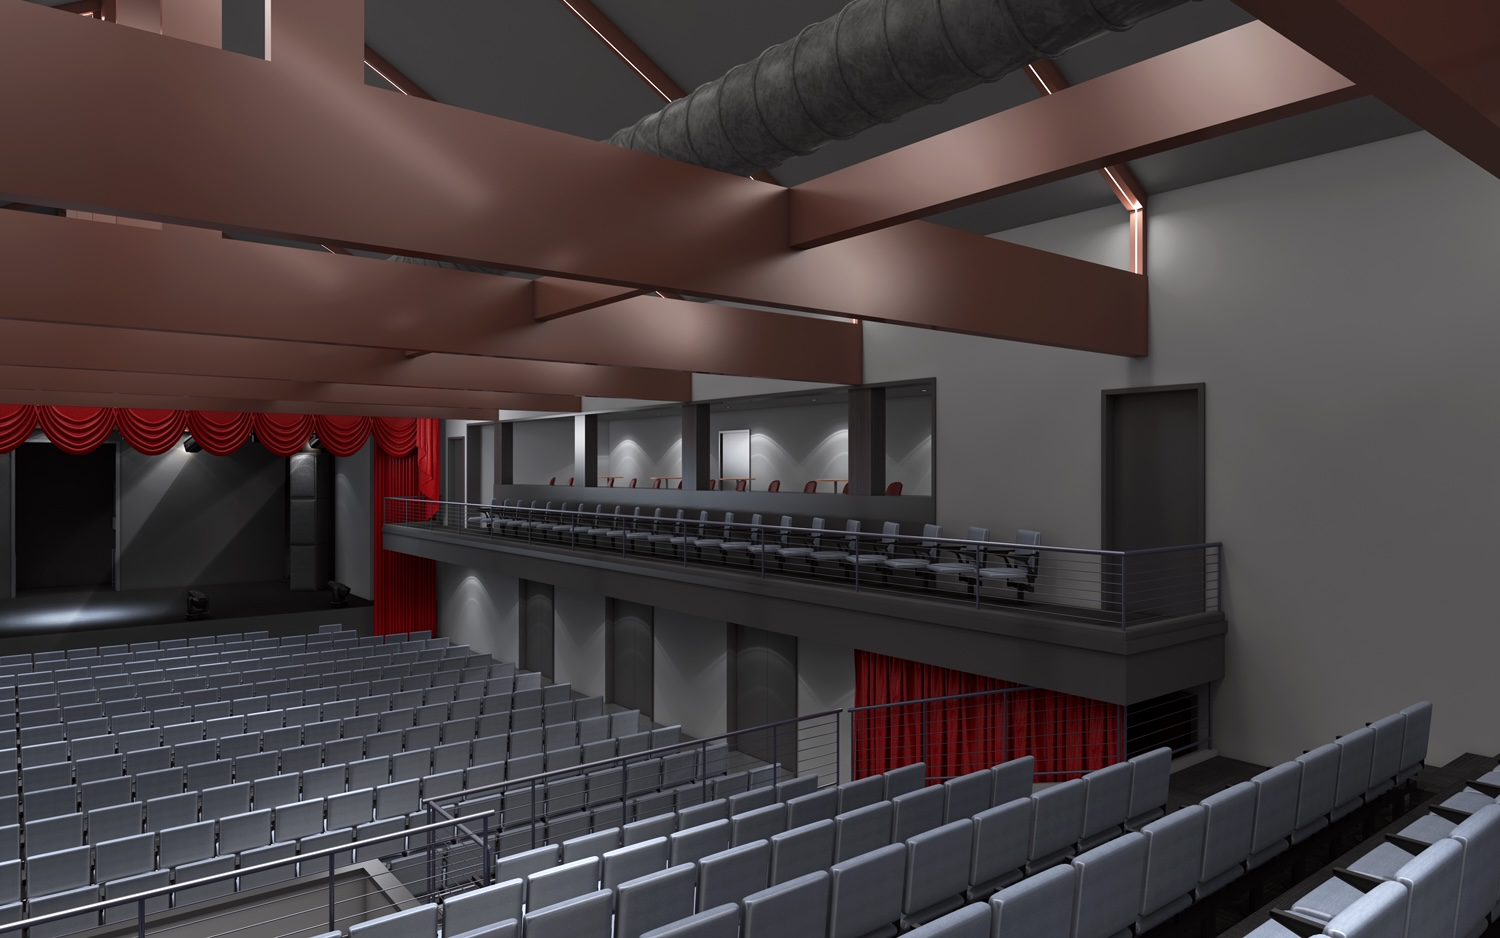 A large auditorium with many seats and a red ceiling.